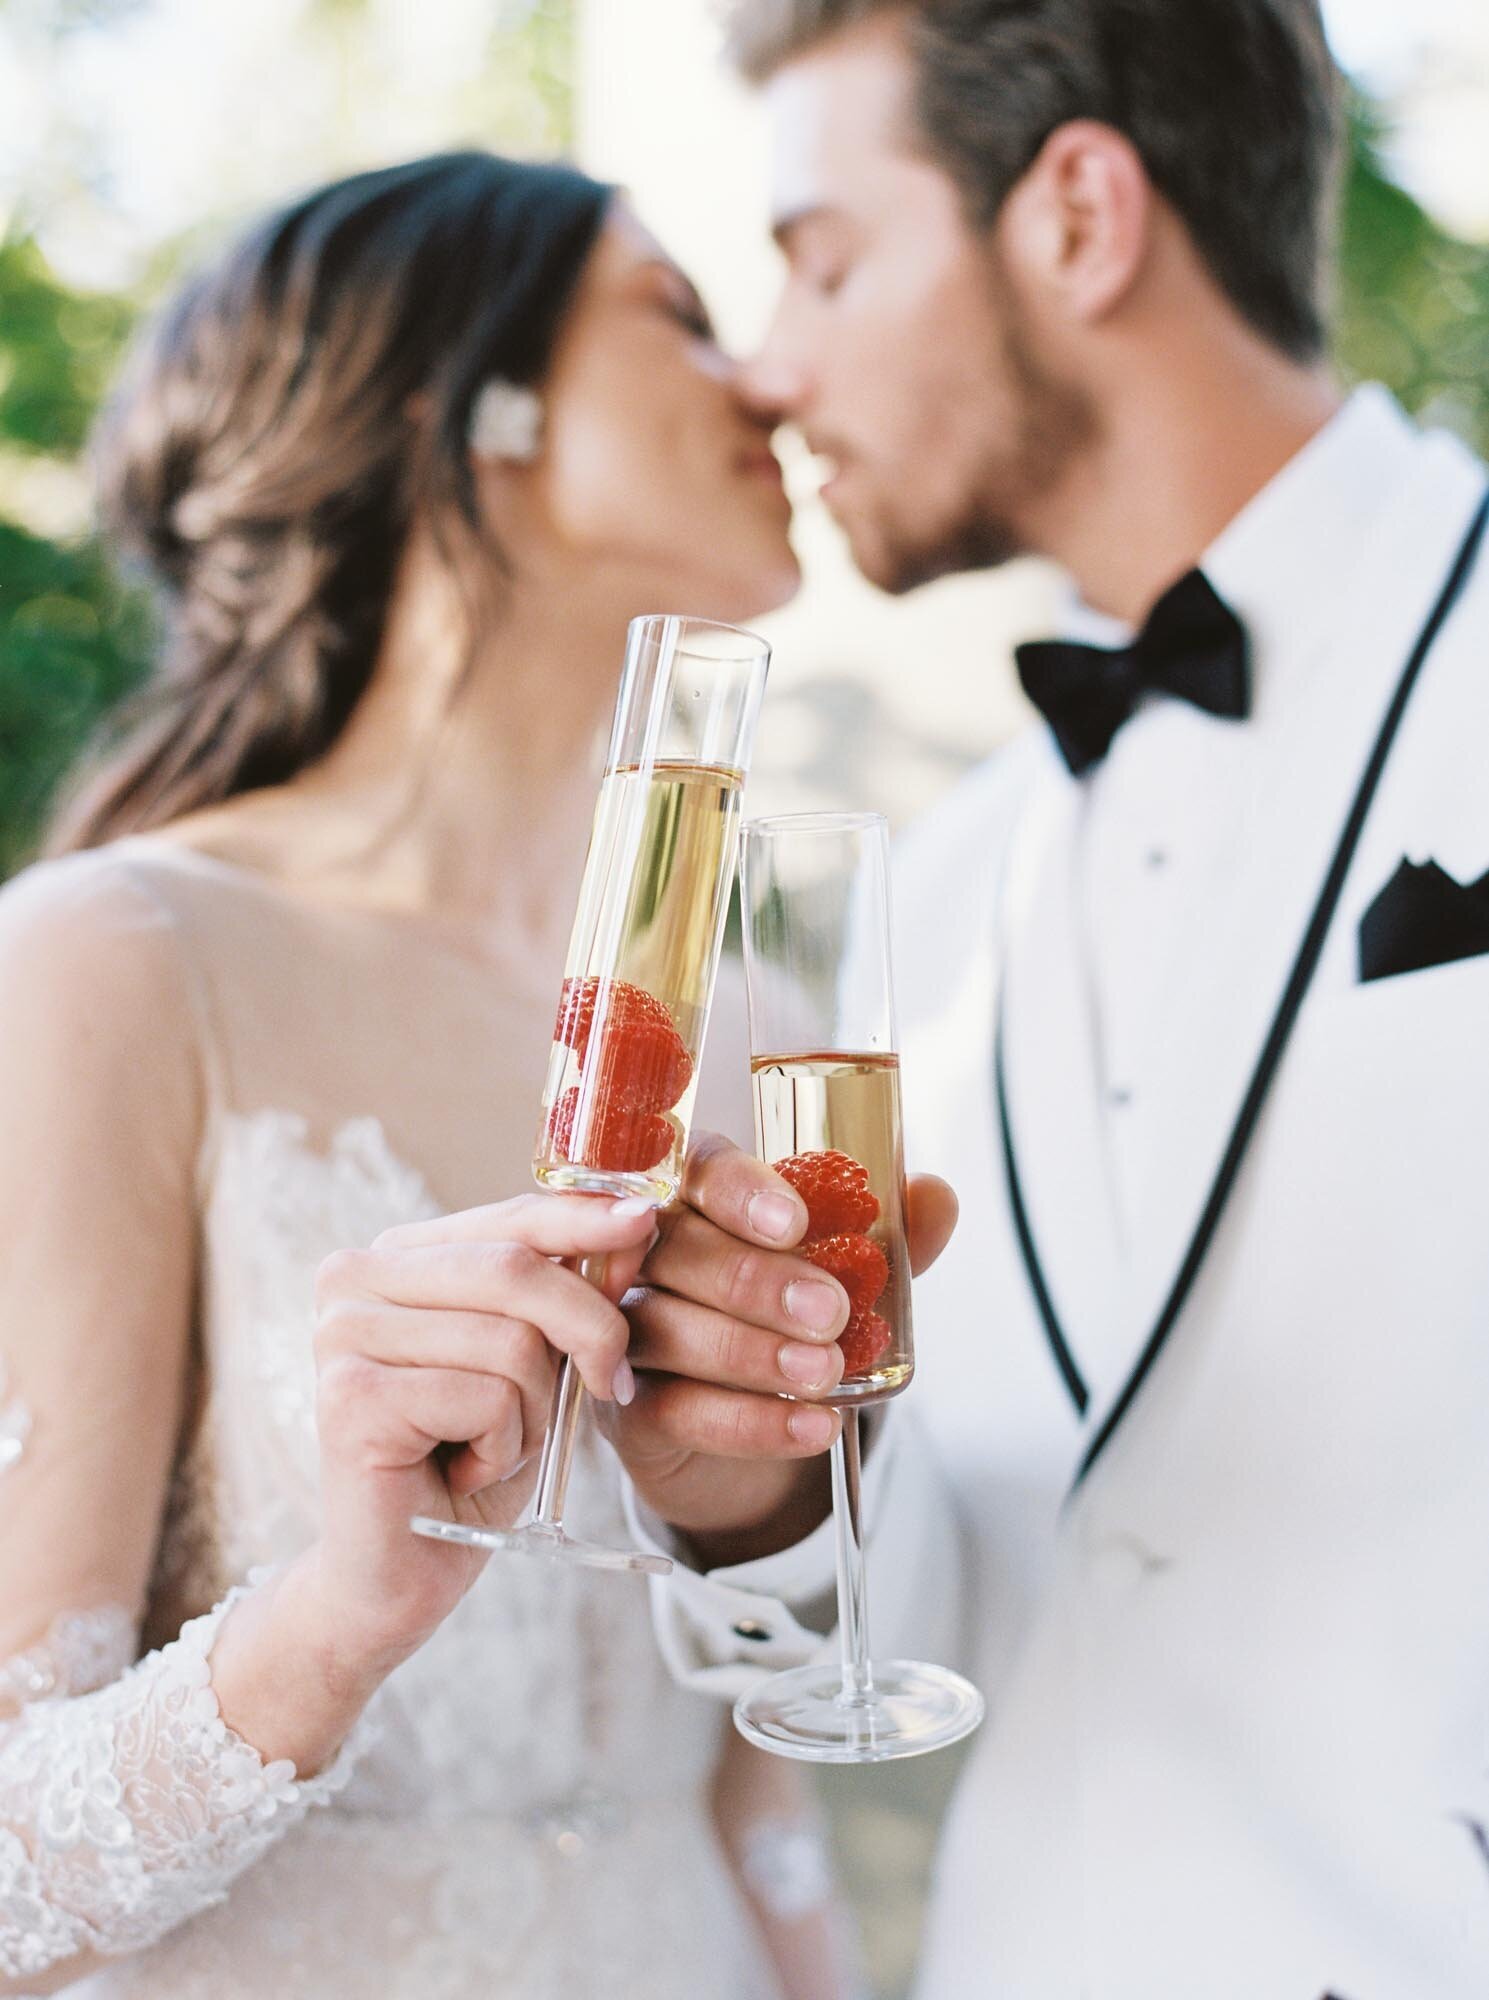 Bride and groom having a toast while kissing